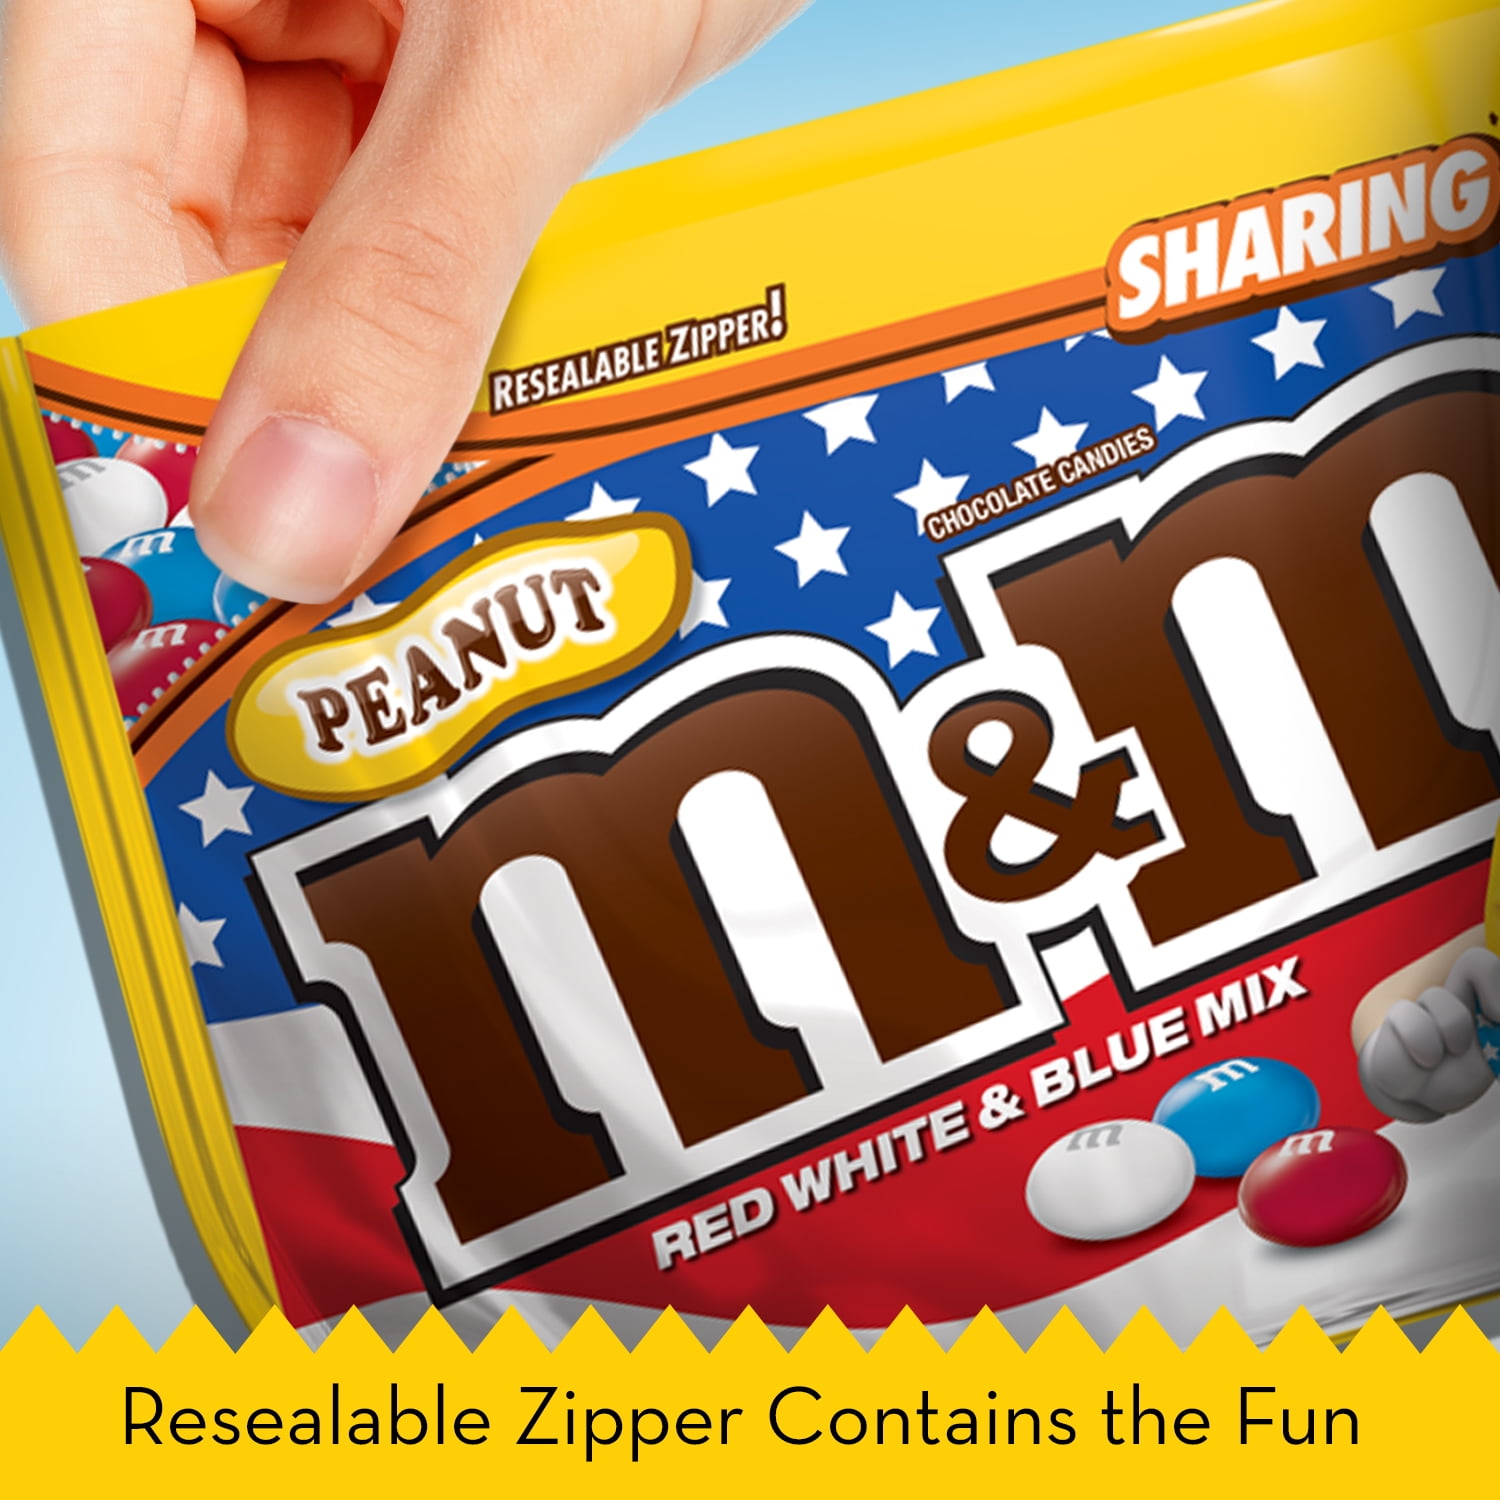 M&M's Red, White & Blue Patriotic Caramel Chocolate Candy, 38